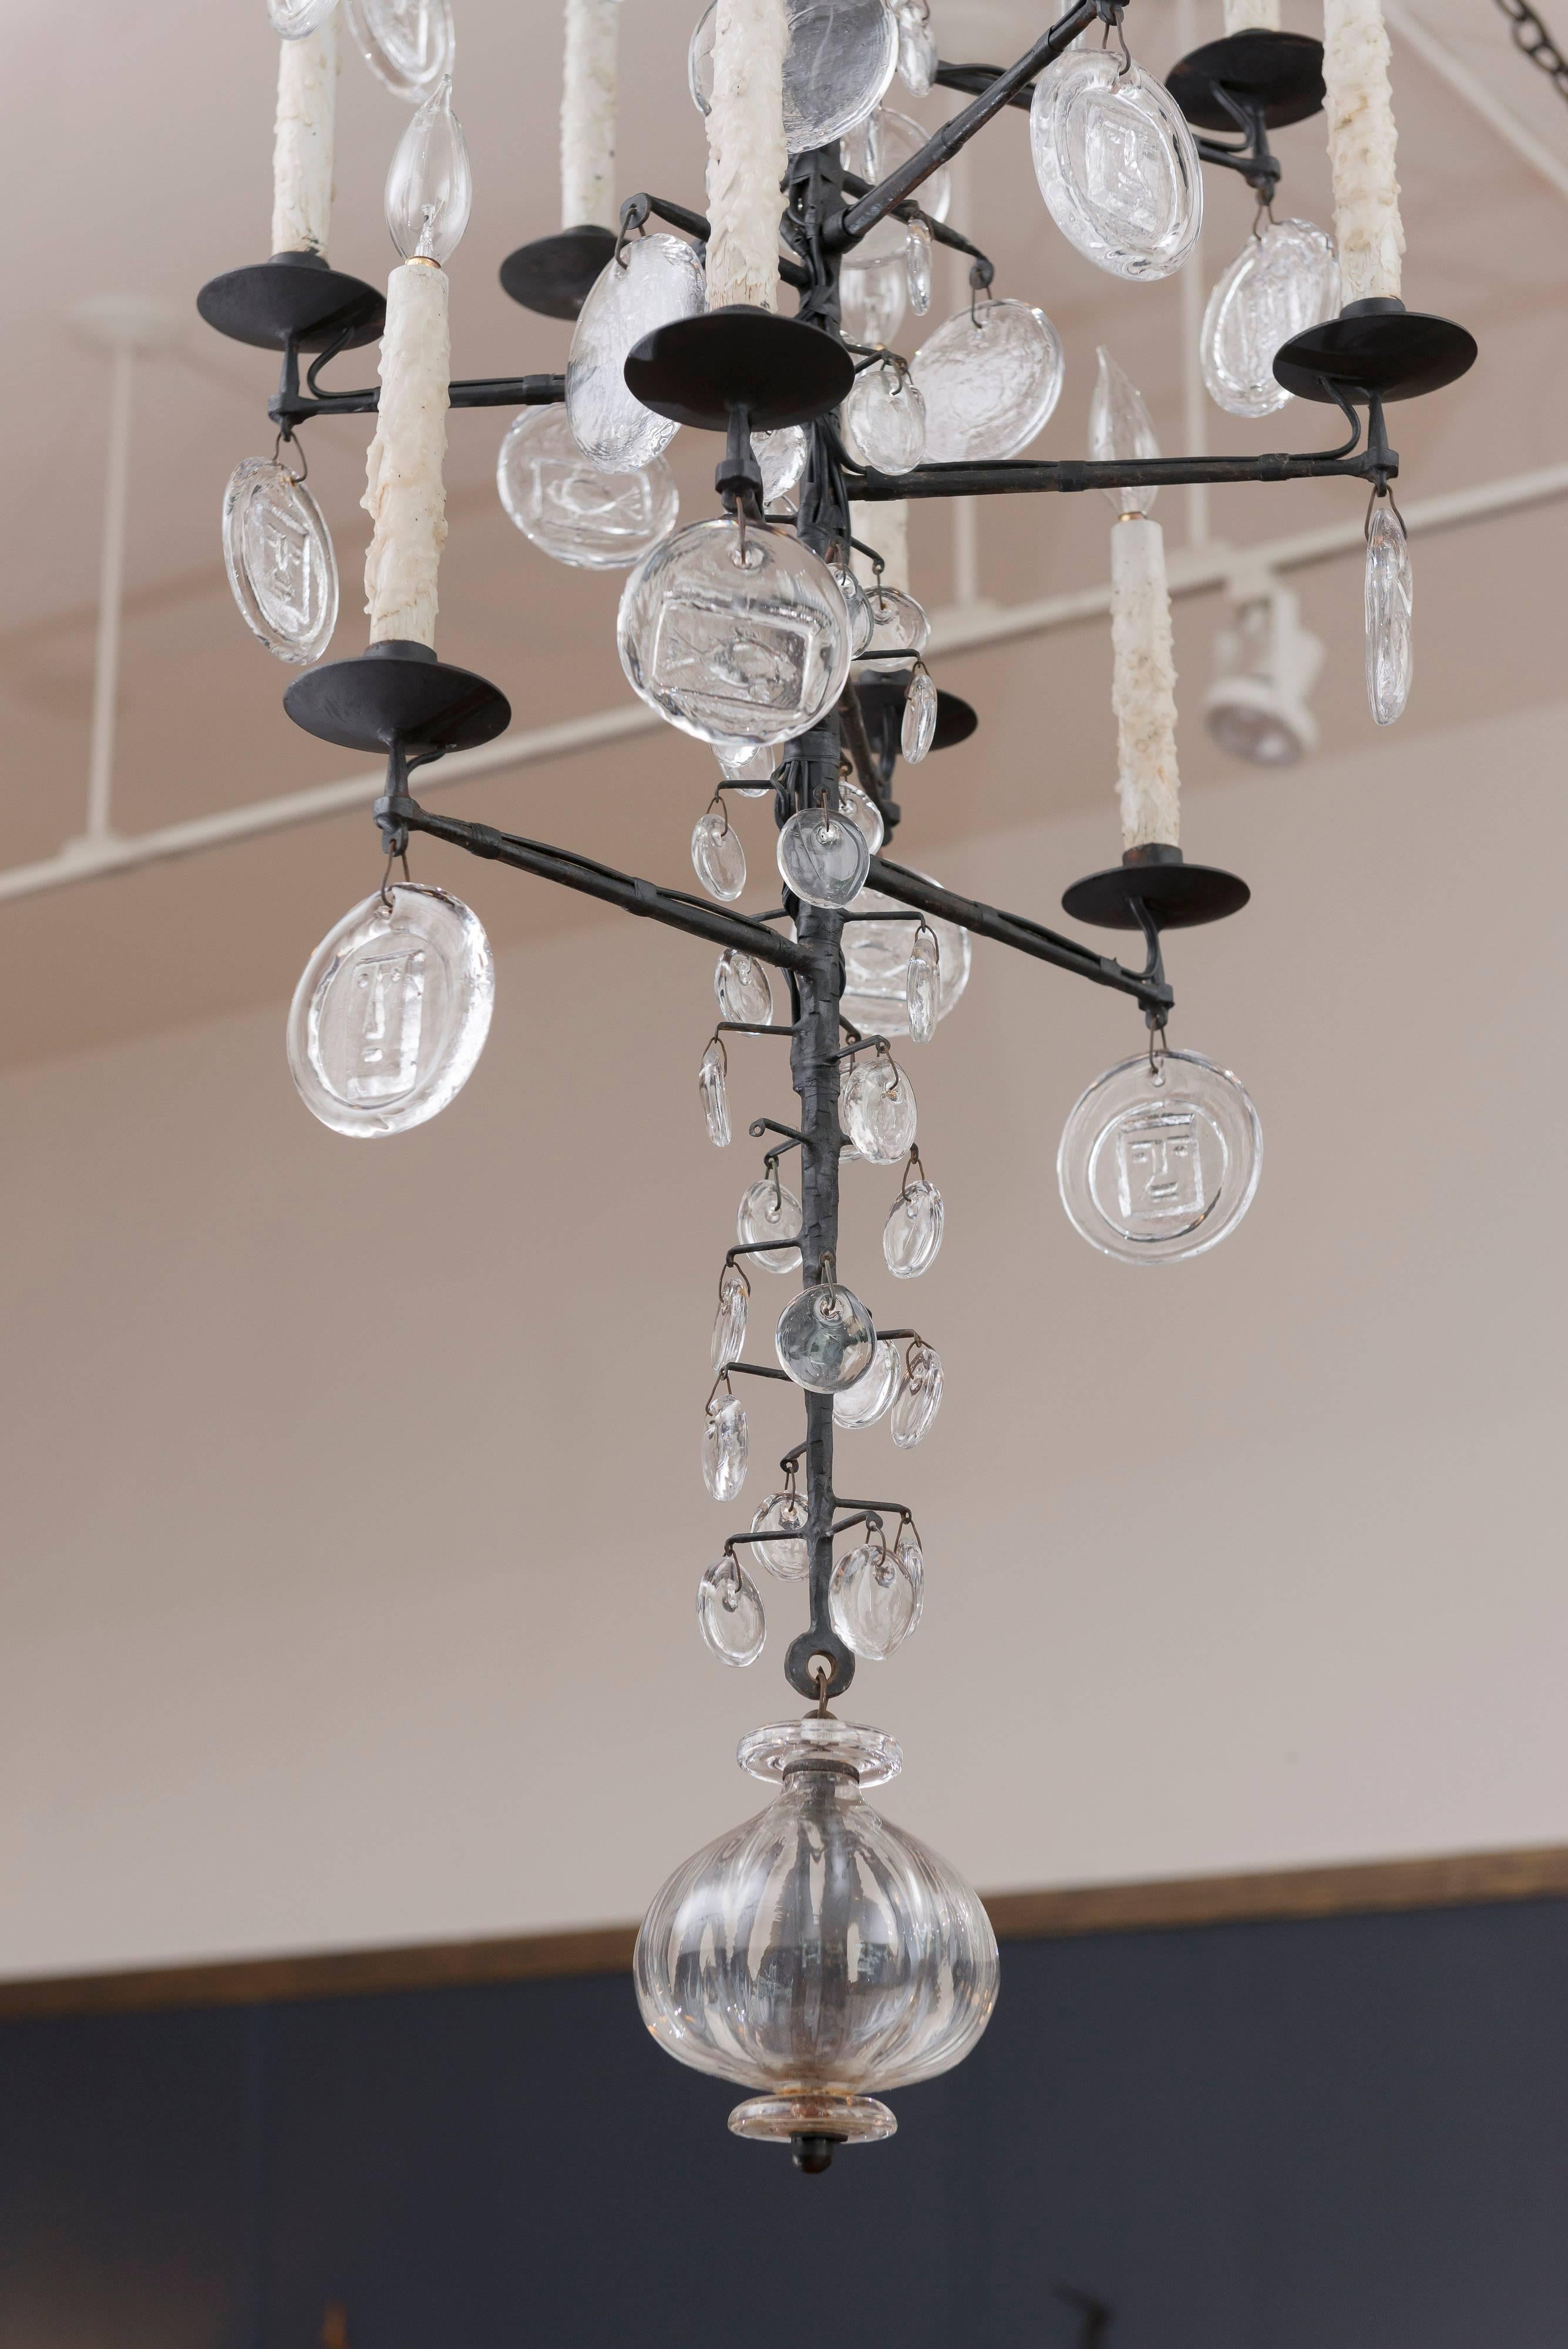 Large and impressive Erik Hoglund design sixteen-light chandelier. Made from hammered steel and decorated with cast glass drops depicting faces, fish and tear drops by Kosta Boda, Sweden.